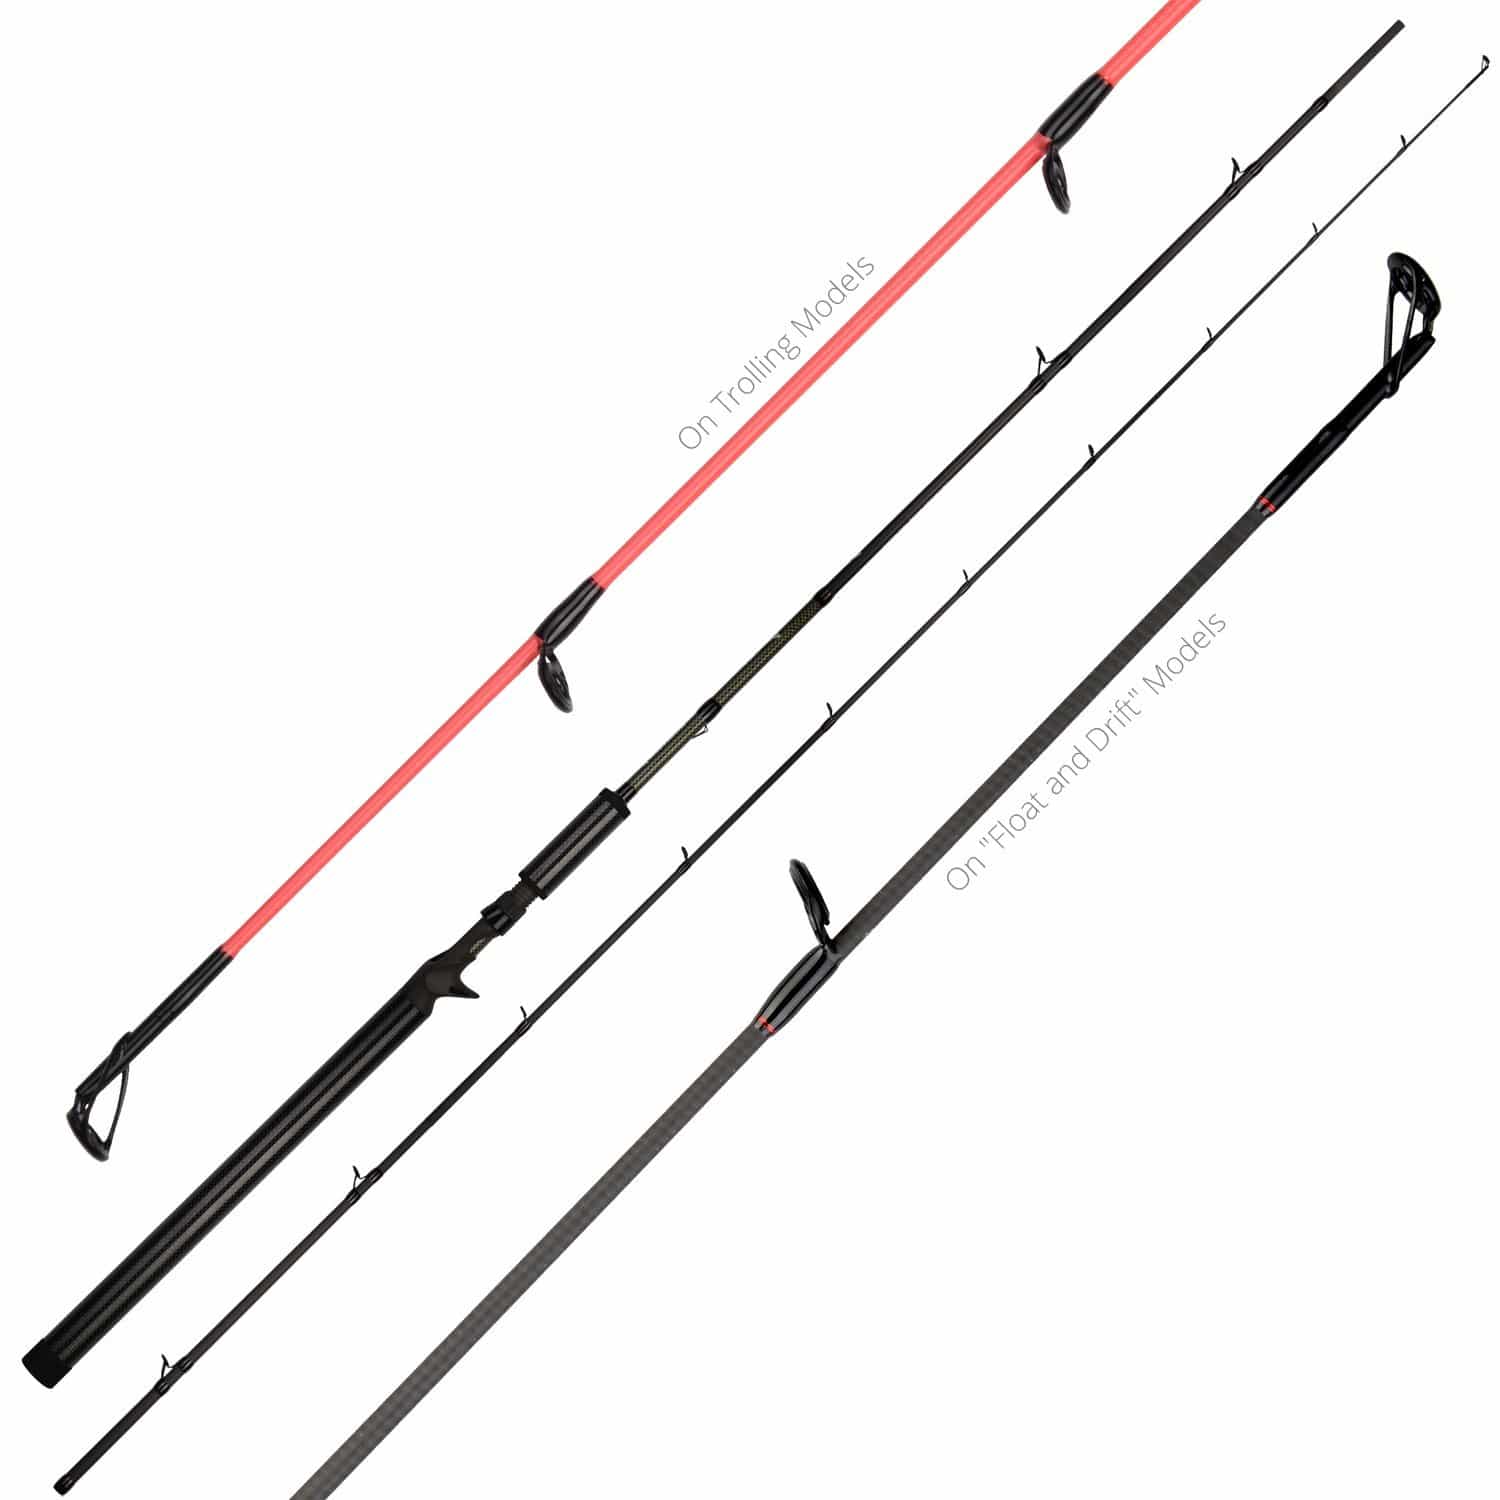 KastKing KROME RODS for Steelhead and Salmon!!!These rods feature